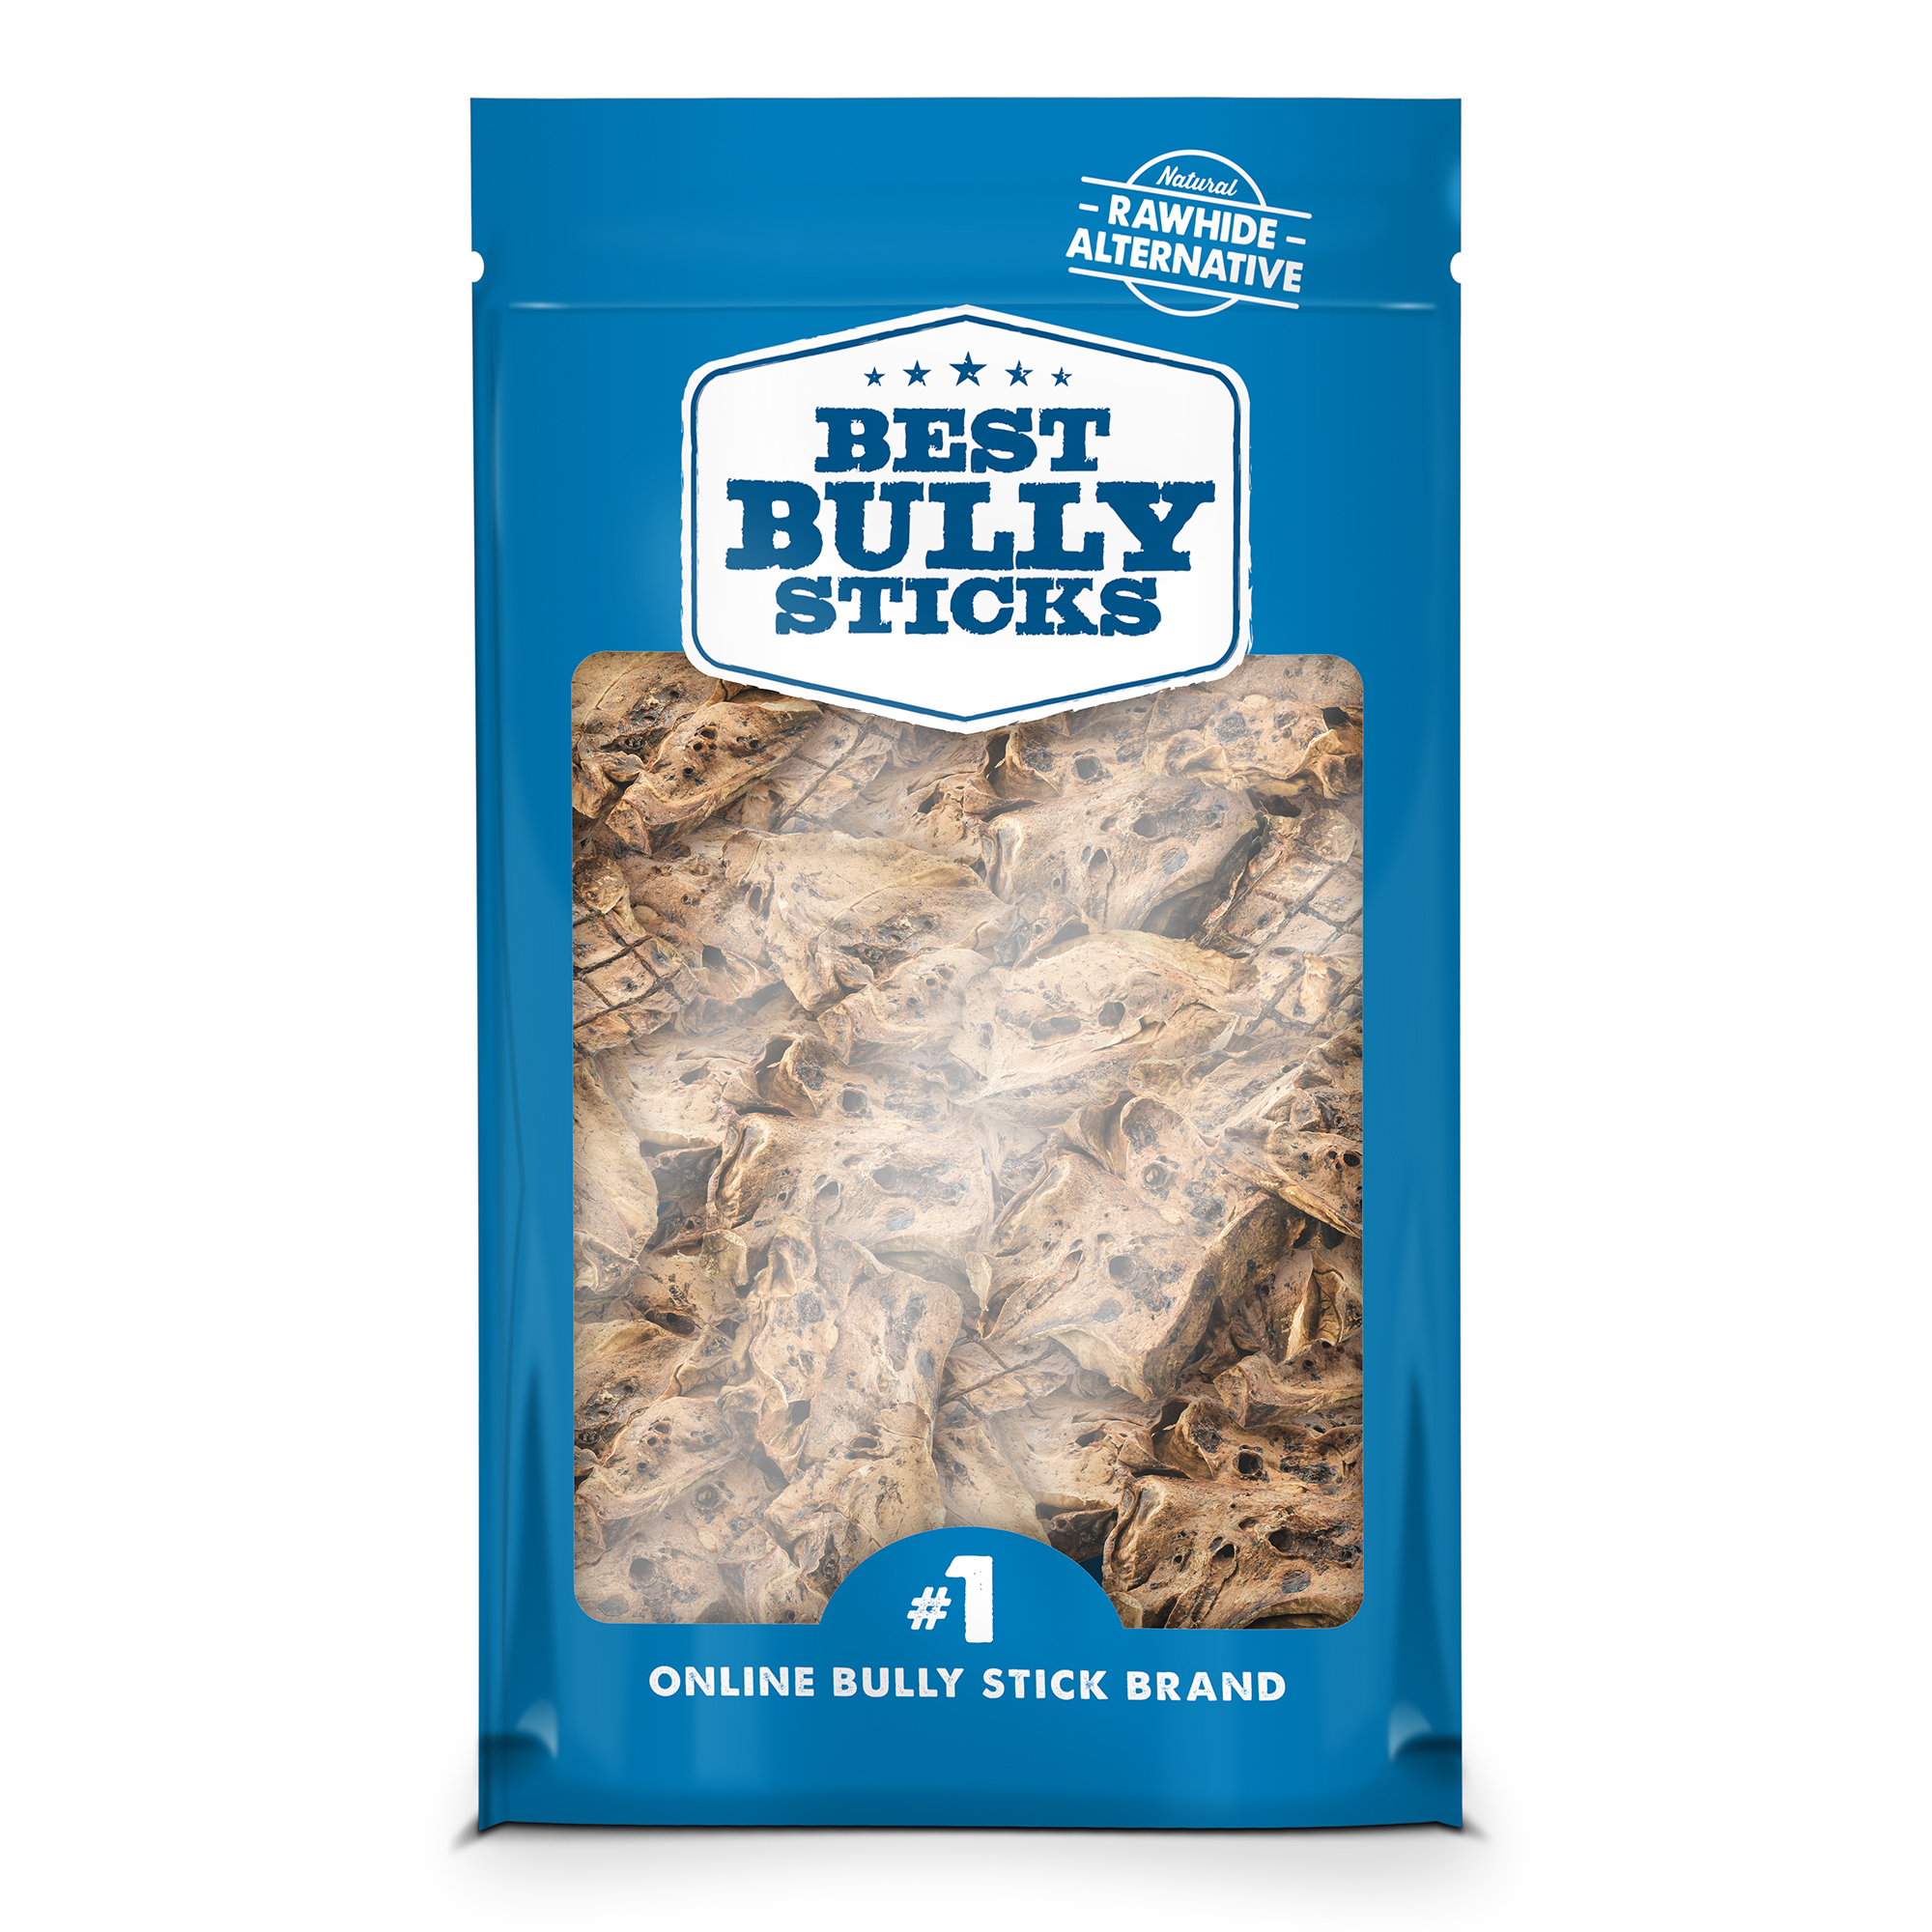 Best Bully Sticks Lamb Lung for Dogs 24oz $11.77 (Was $31.99) Walmart